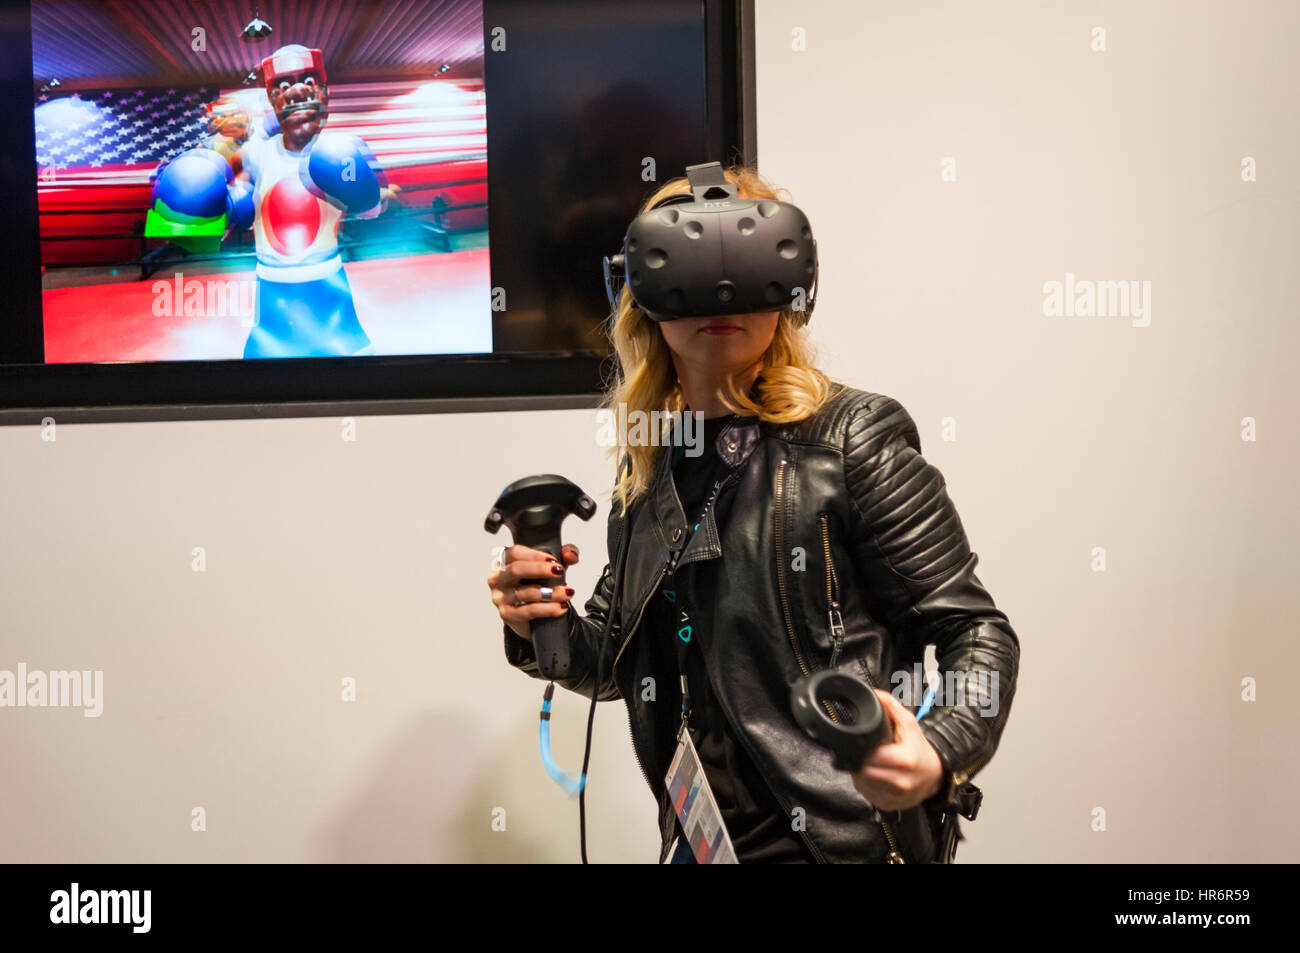 Barcelona, Spain. 27th Feb, 2017. A girl testing a HTC glasses during the Mobile World Congress wireless show in Barcelona. The annual Mobile World Congress hosts some of the world's largest communications companies, with many unveiling their latest phones and wearables gadgets. Credit: Charlie Perez/Alamy Live News Stock Photo